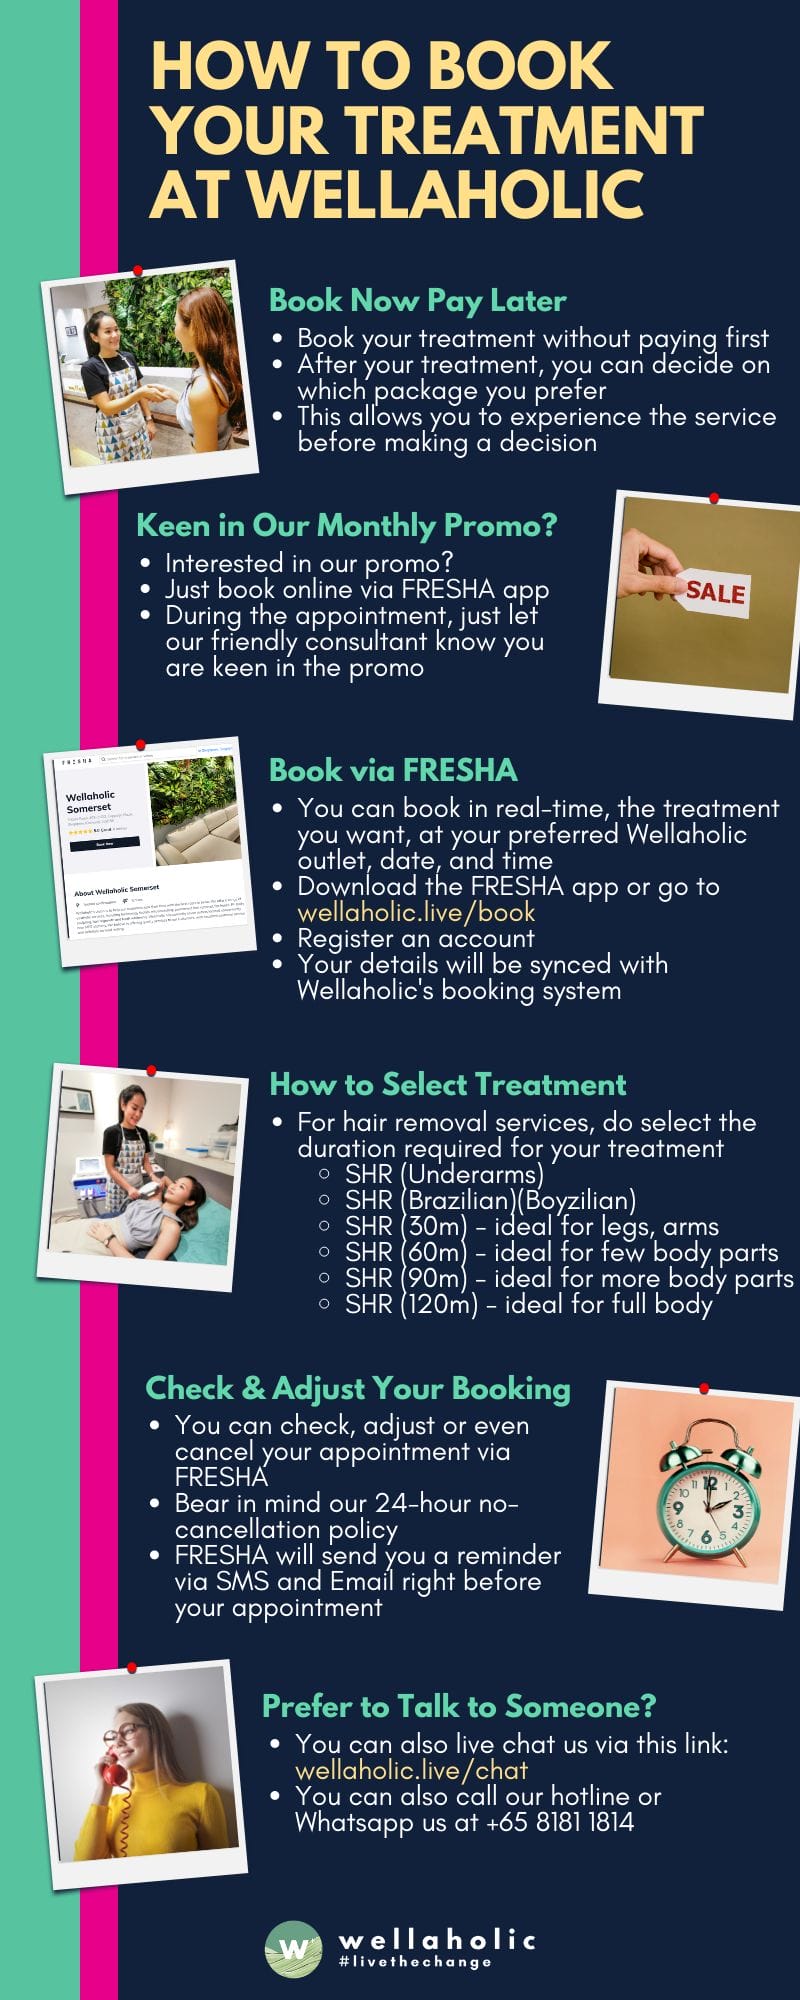 How to Book Your Treatment with Wellaholic